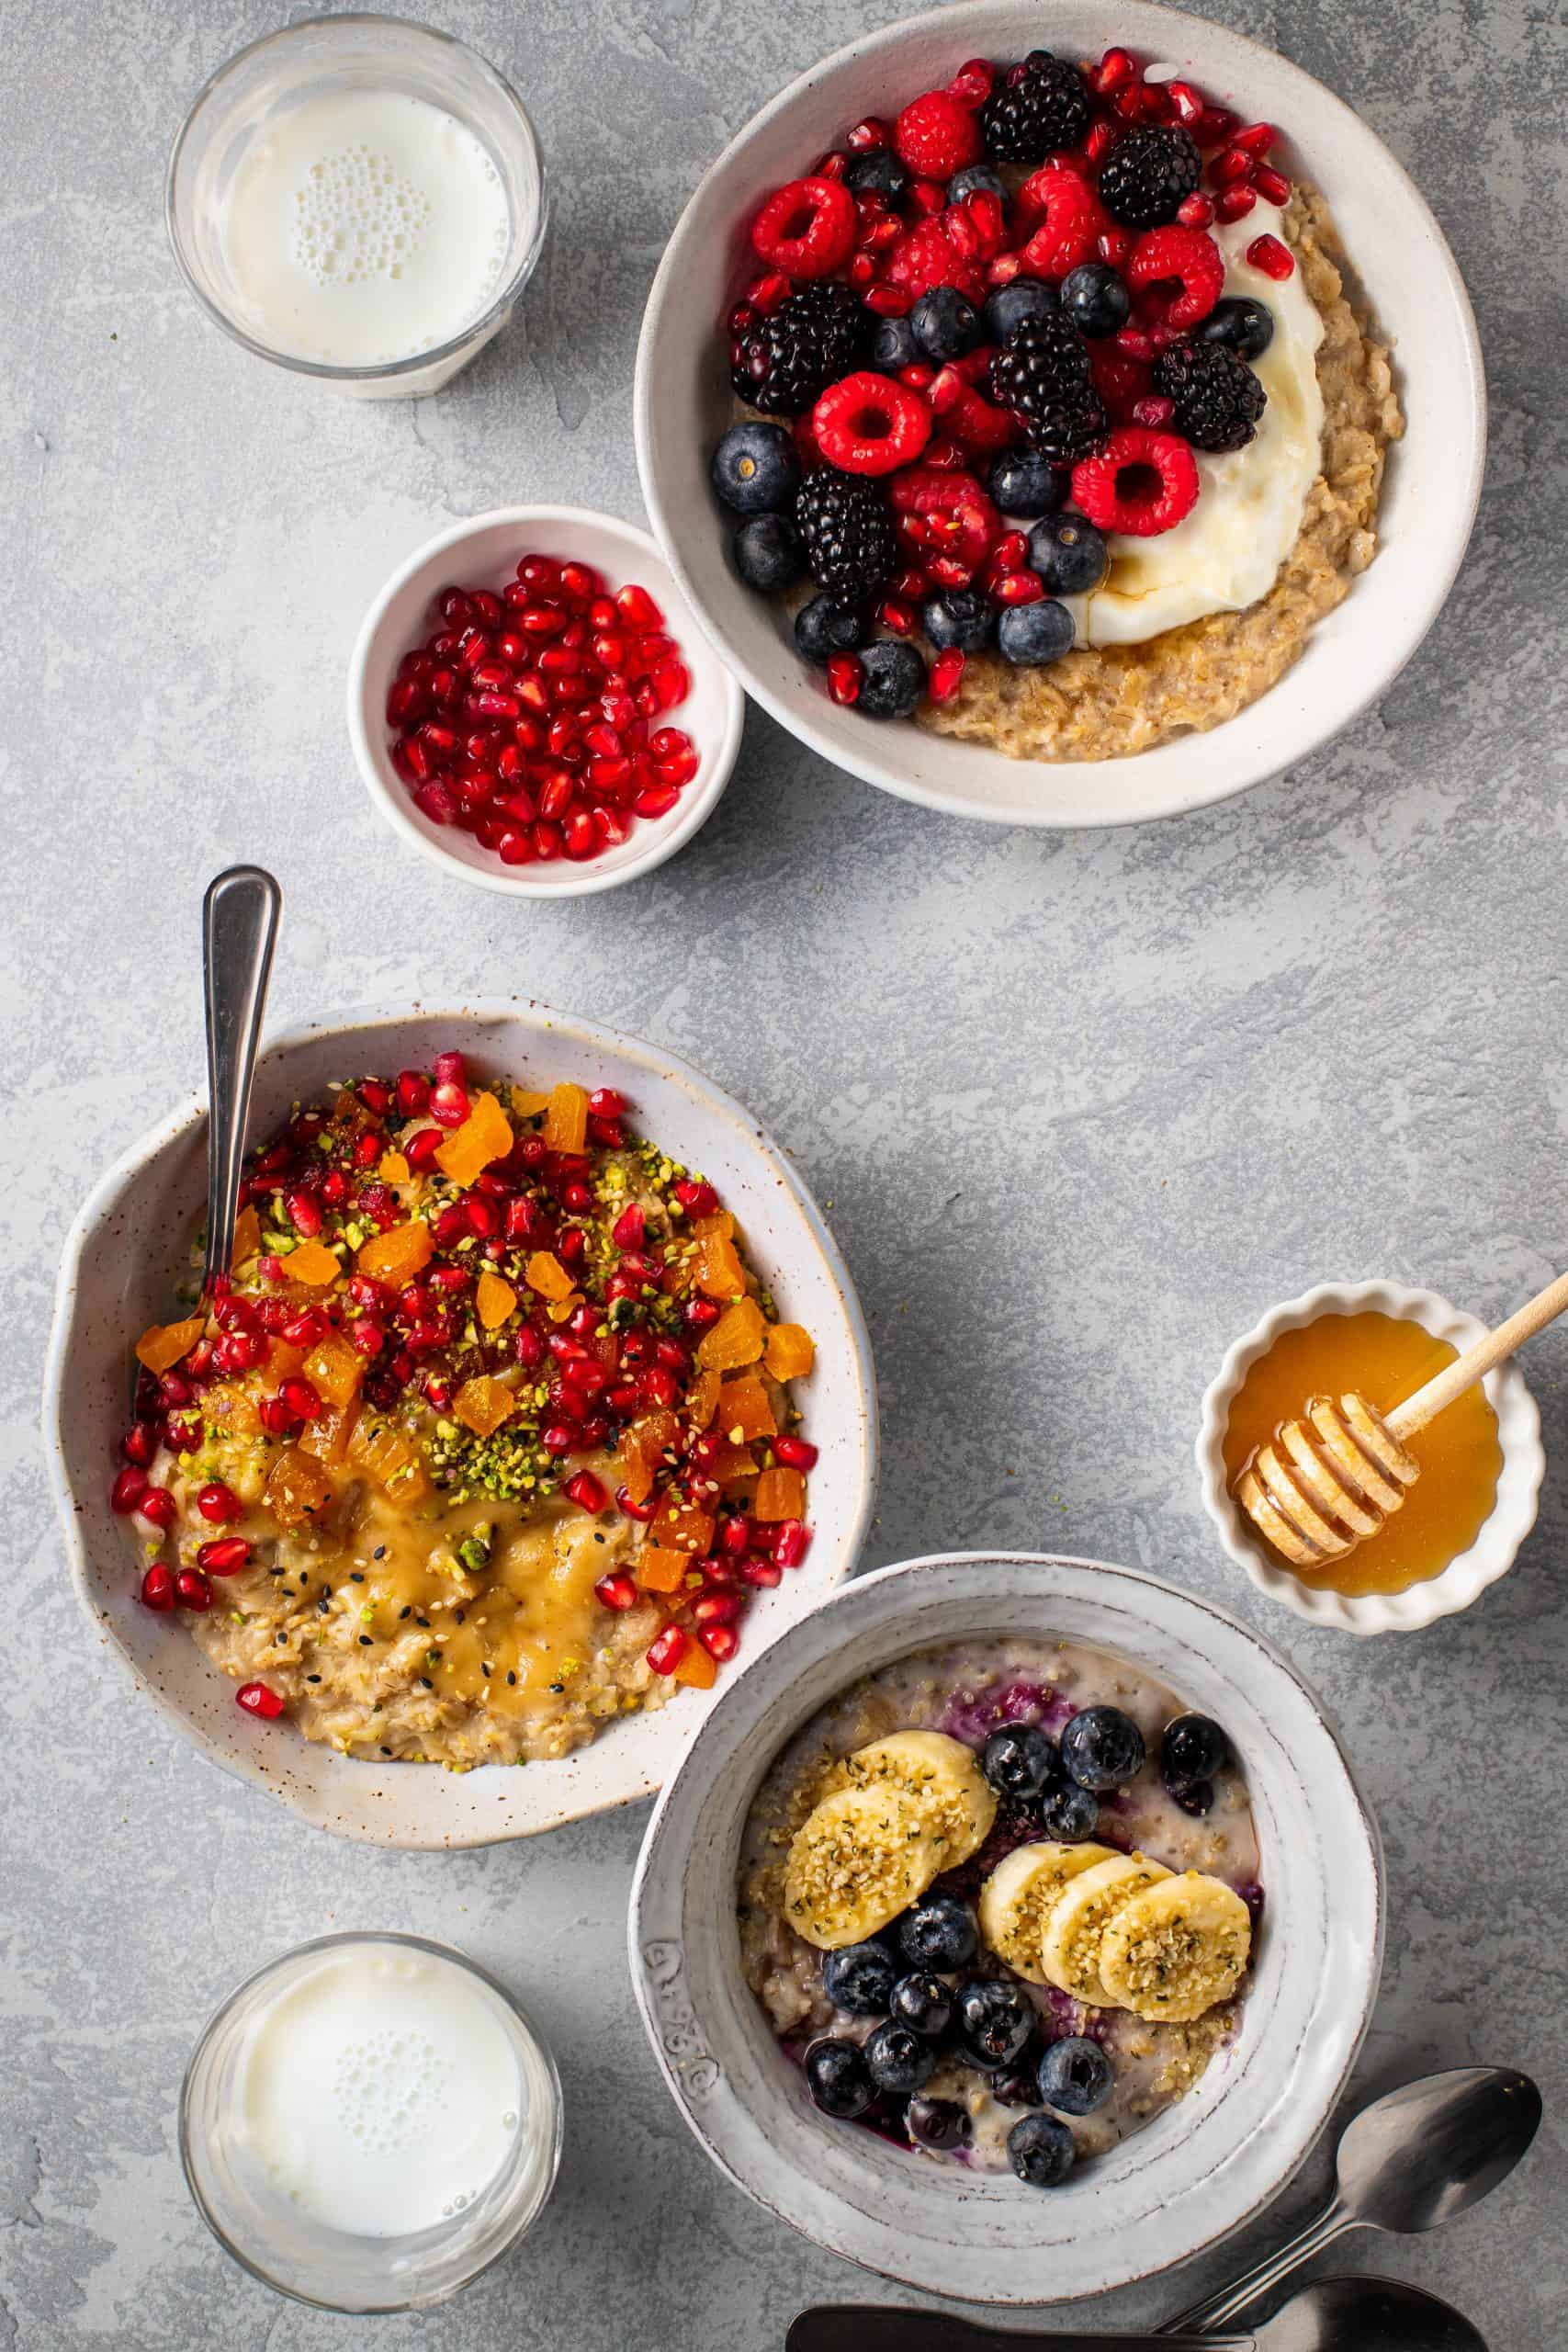 Three bowls of Oatmeal with various toppings